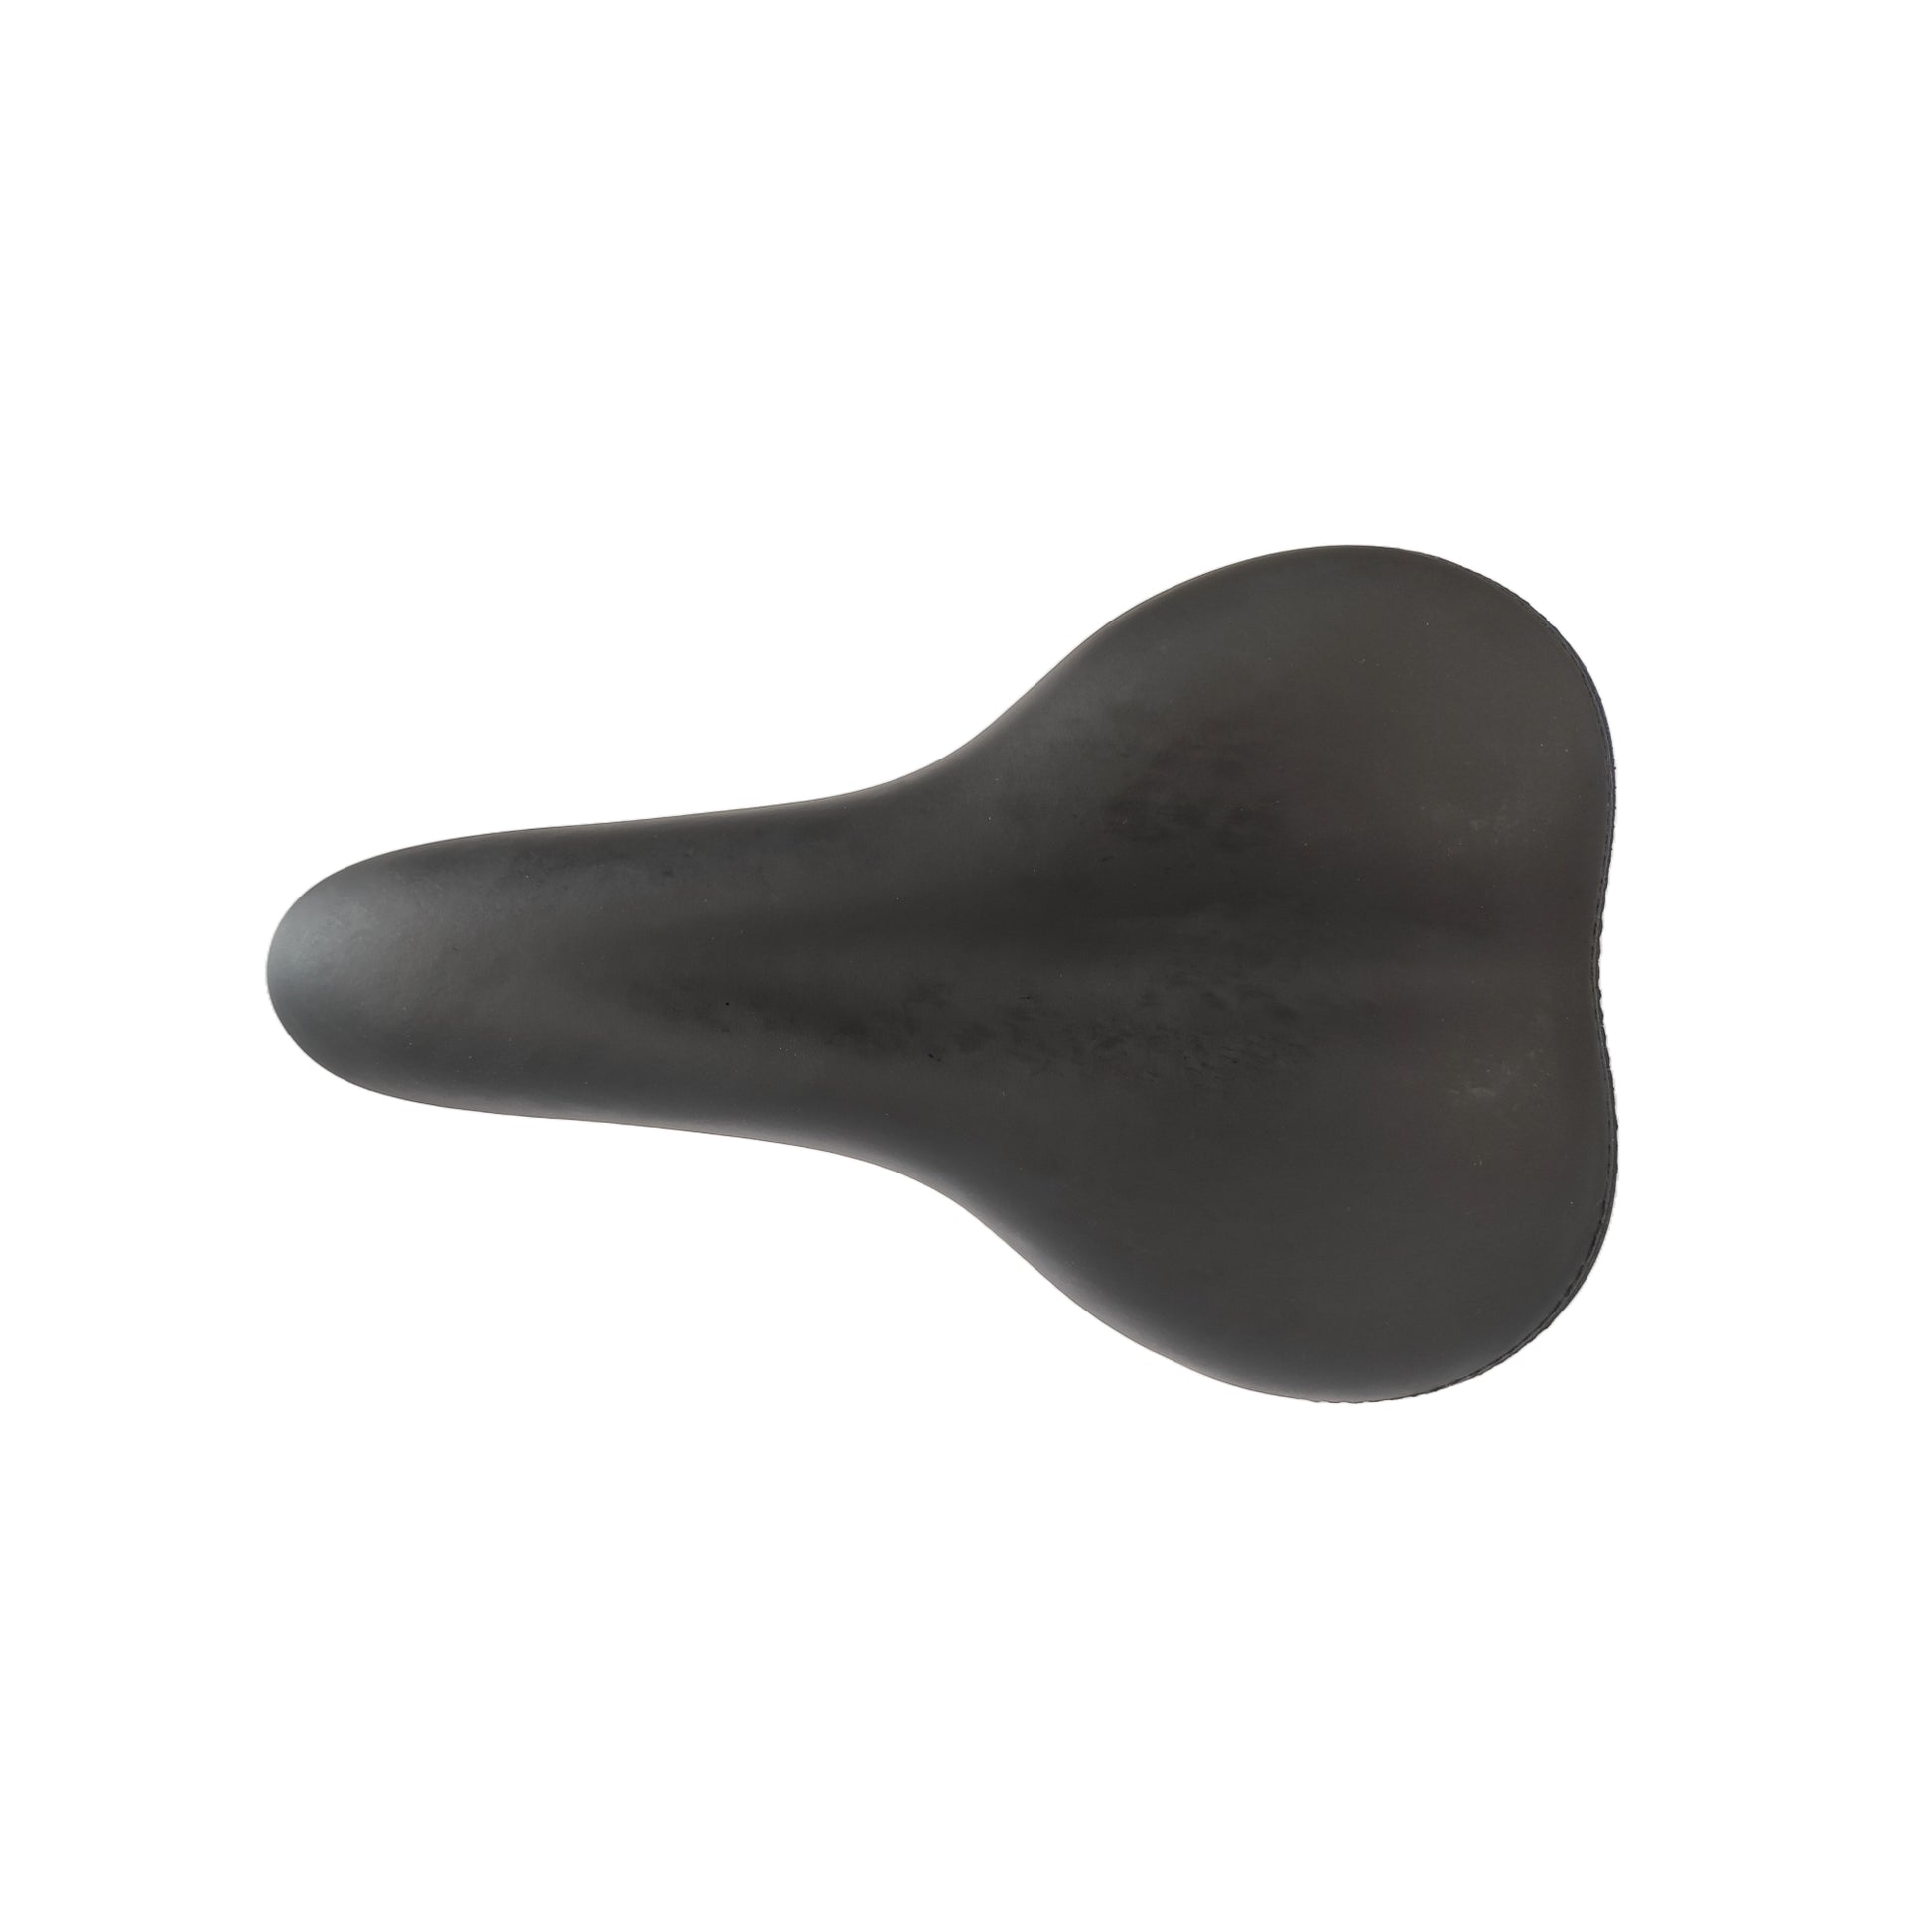 Bicycle saddle spare part for mtb and hybrid cycle by omobikes top view